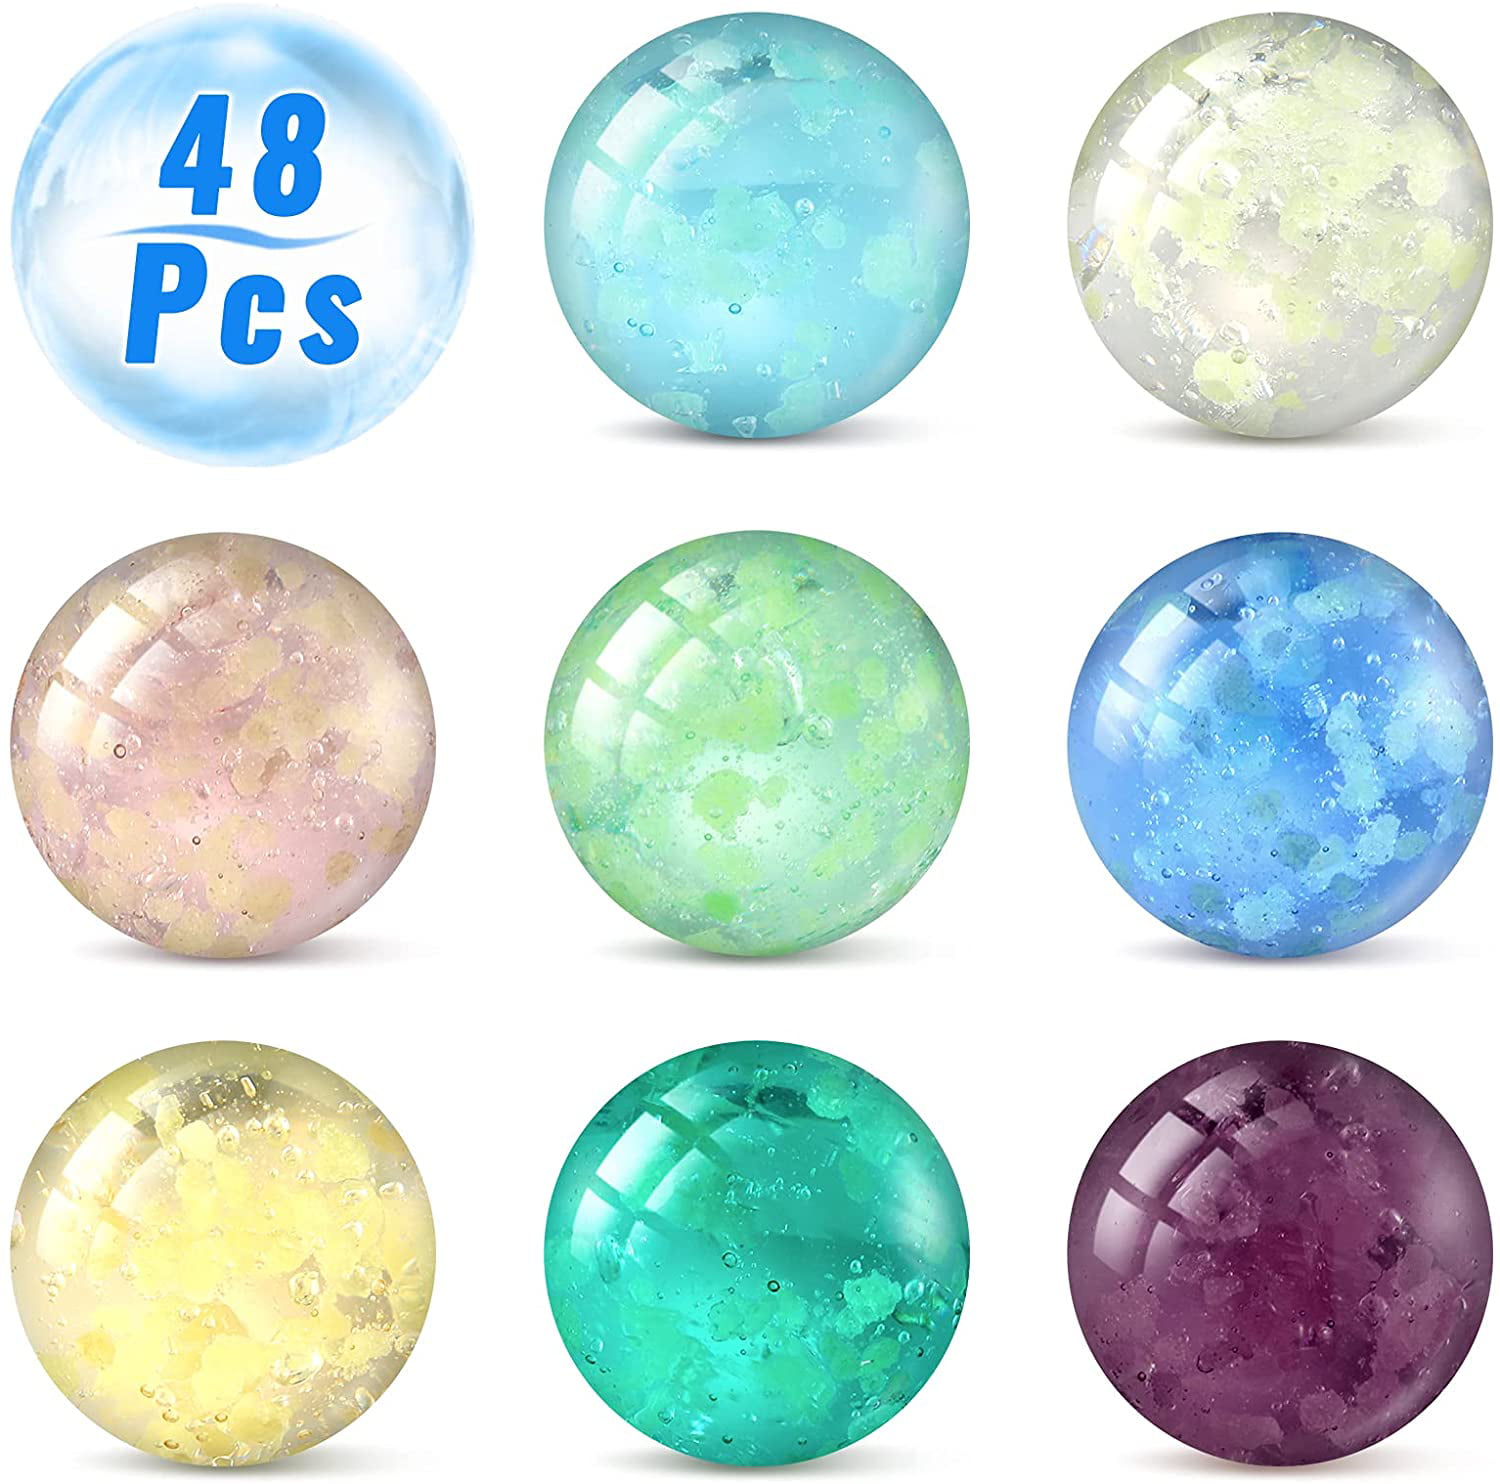 10 Pcs Glow in The Dark Marbles ARSUK 10pcs Large Handmade Glow in The Dark Doted Style Glass Marbles Sports Toys & Outdoor 